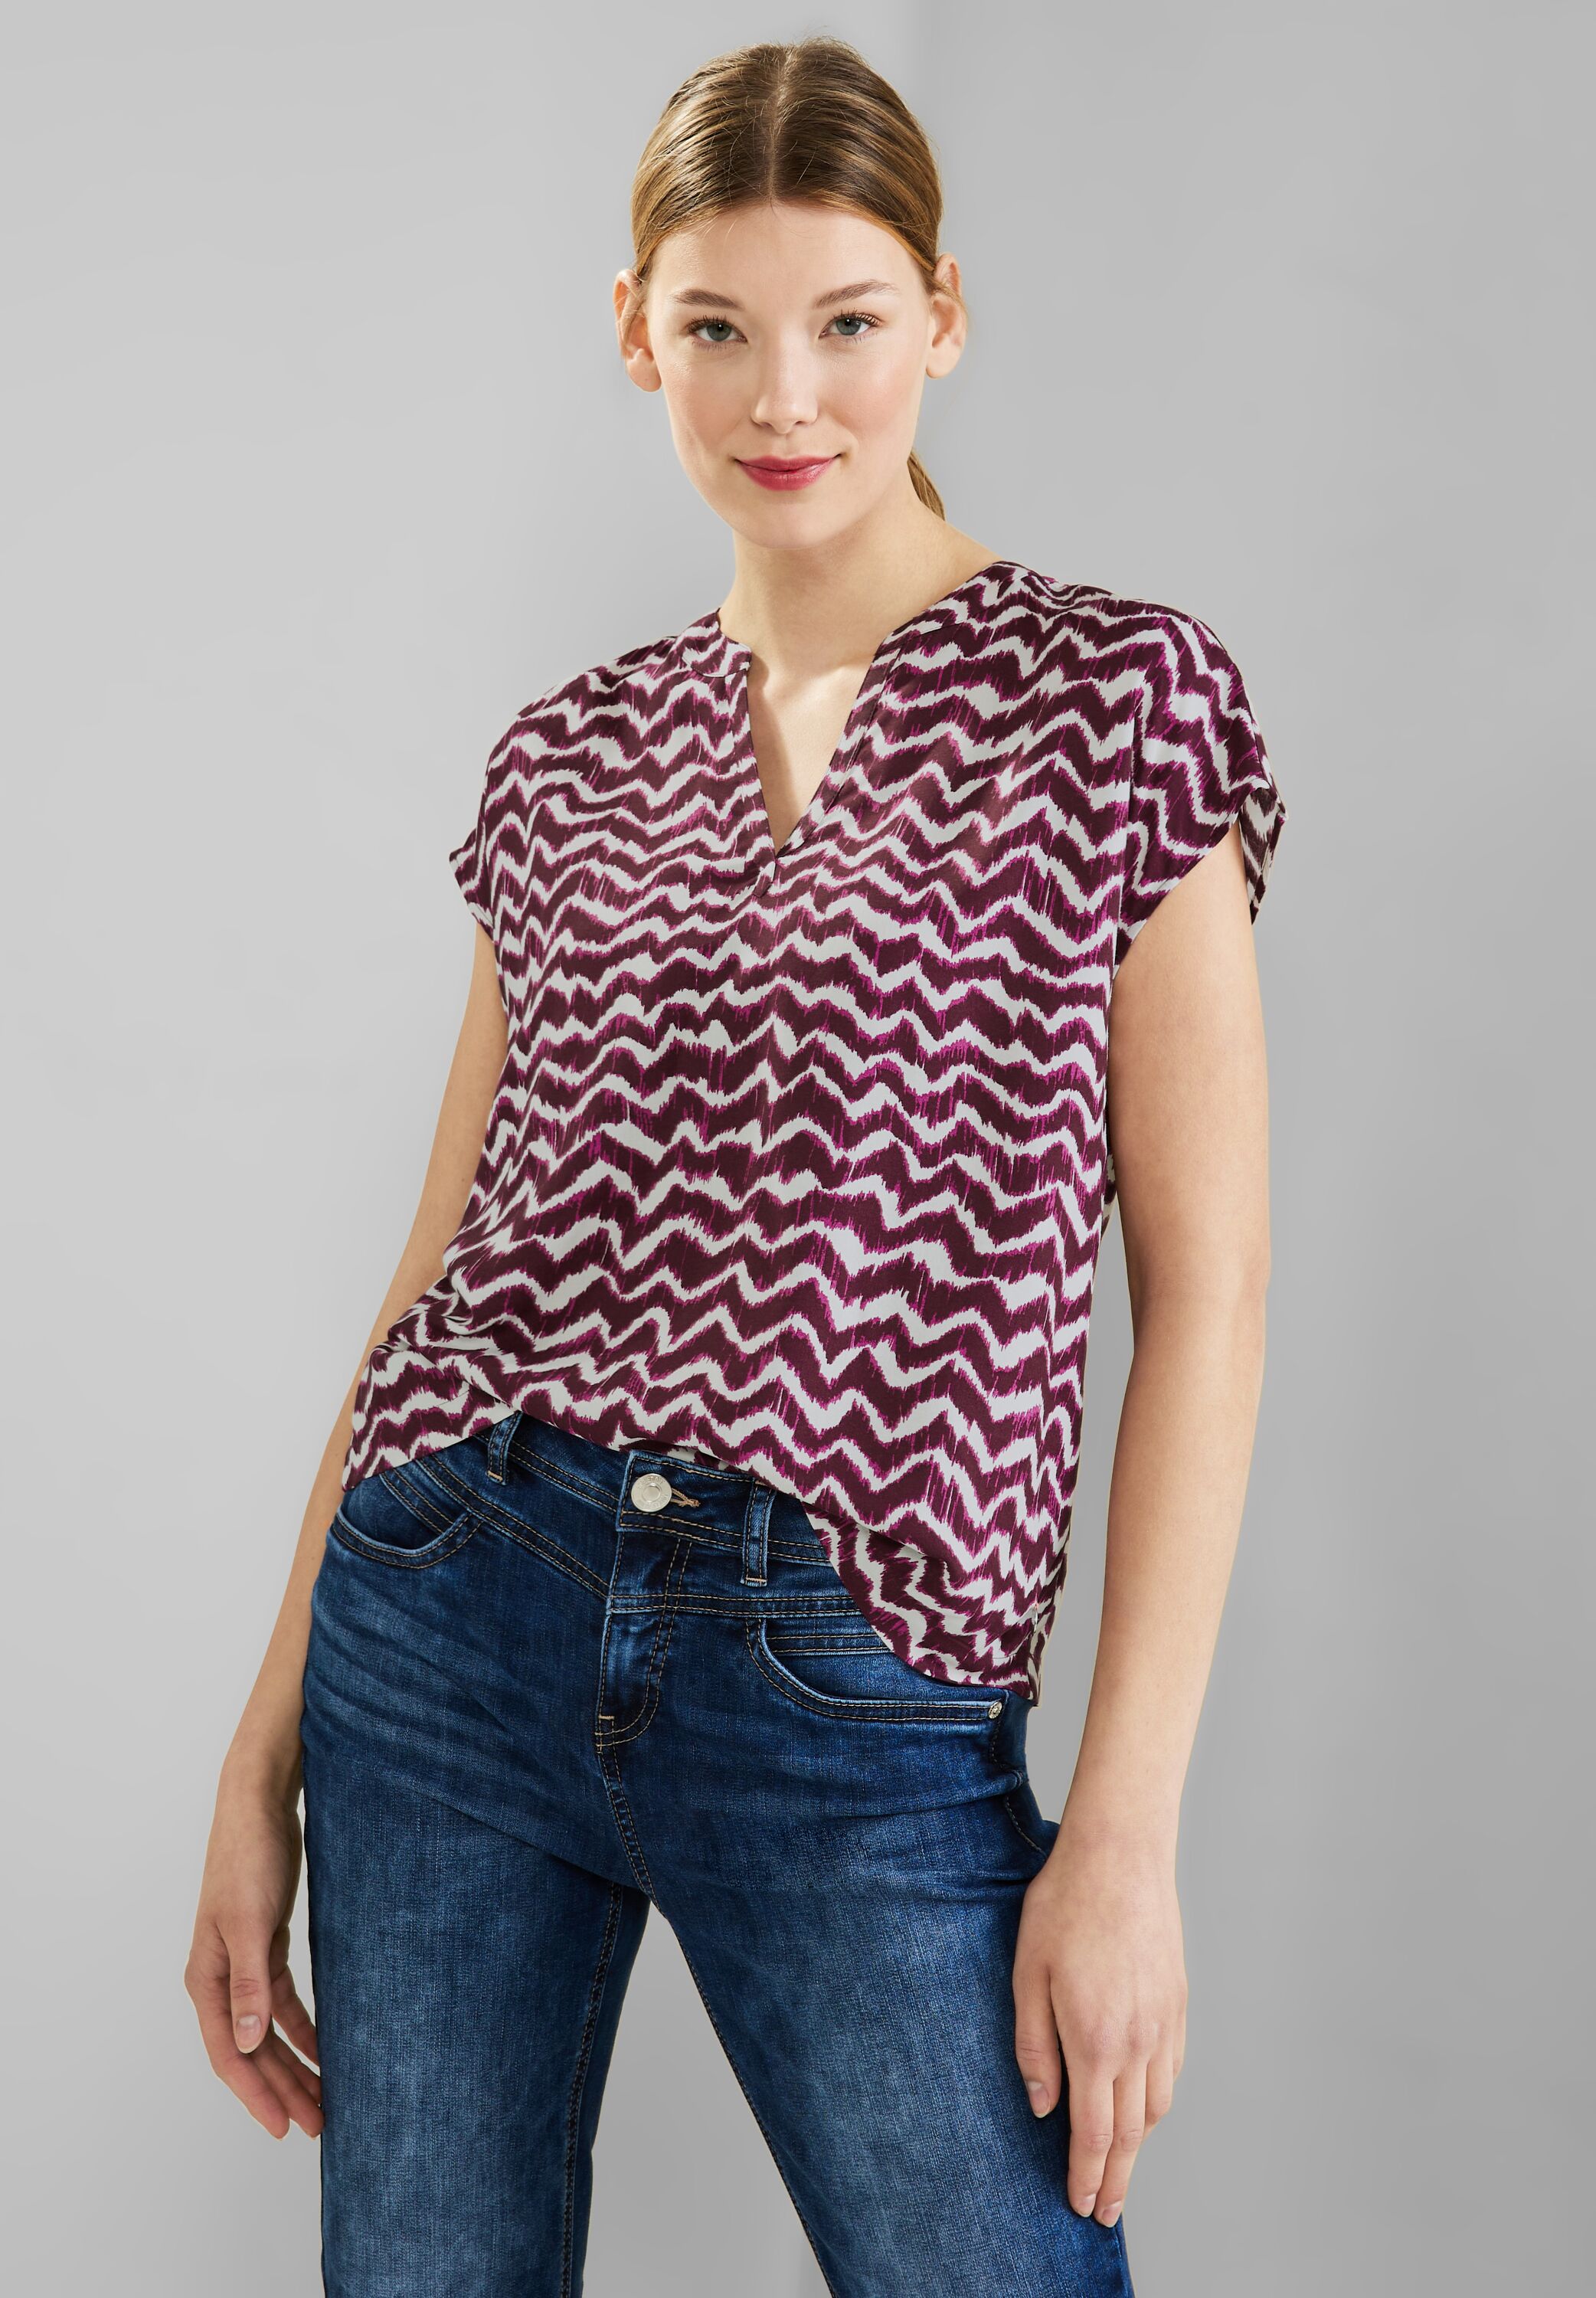 reduziert im Berry Tamed in CONCEPT A343896-34886 Street SALE Shirtbluse One - Mode